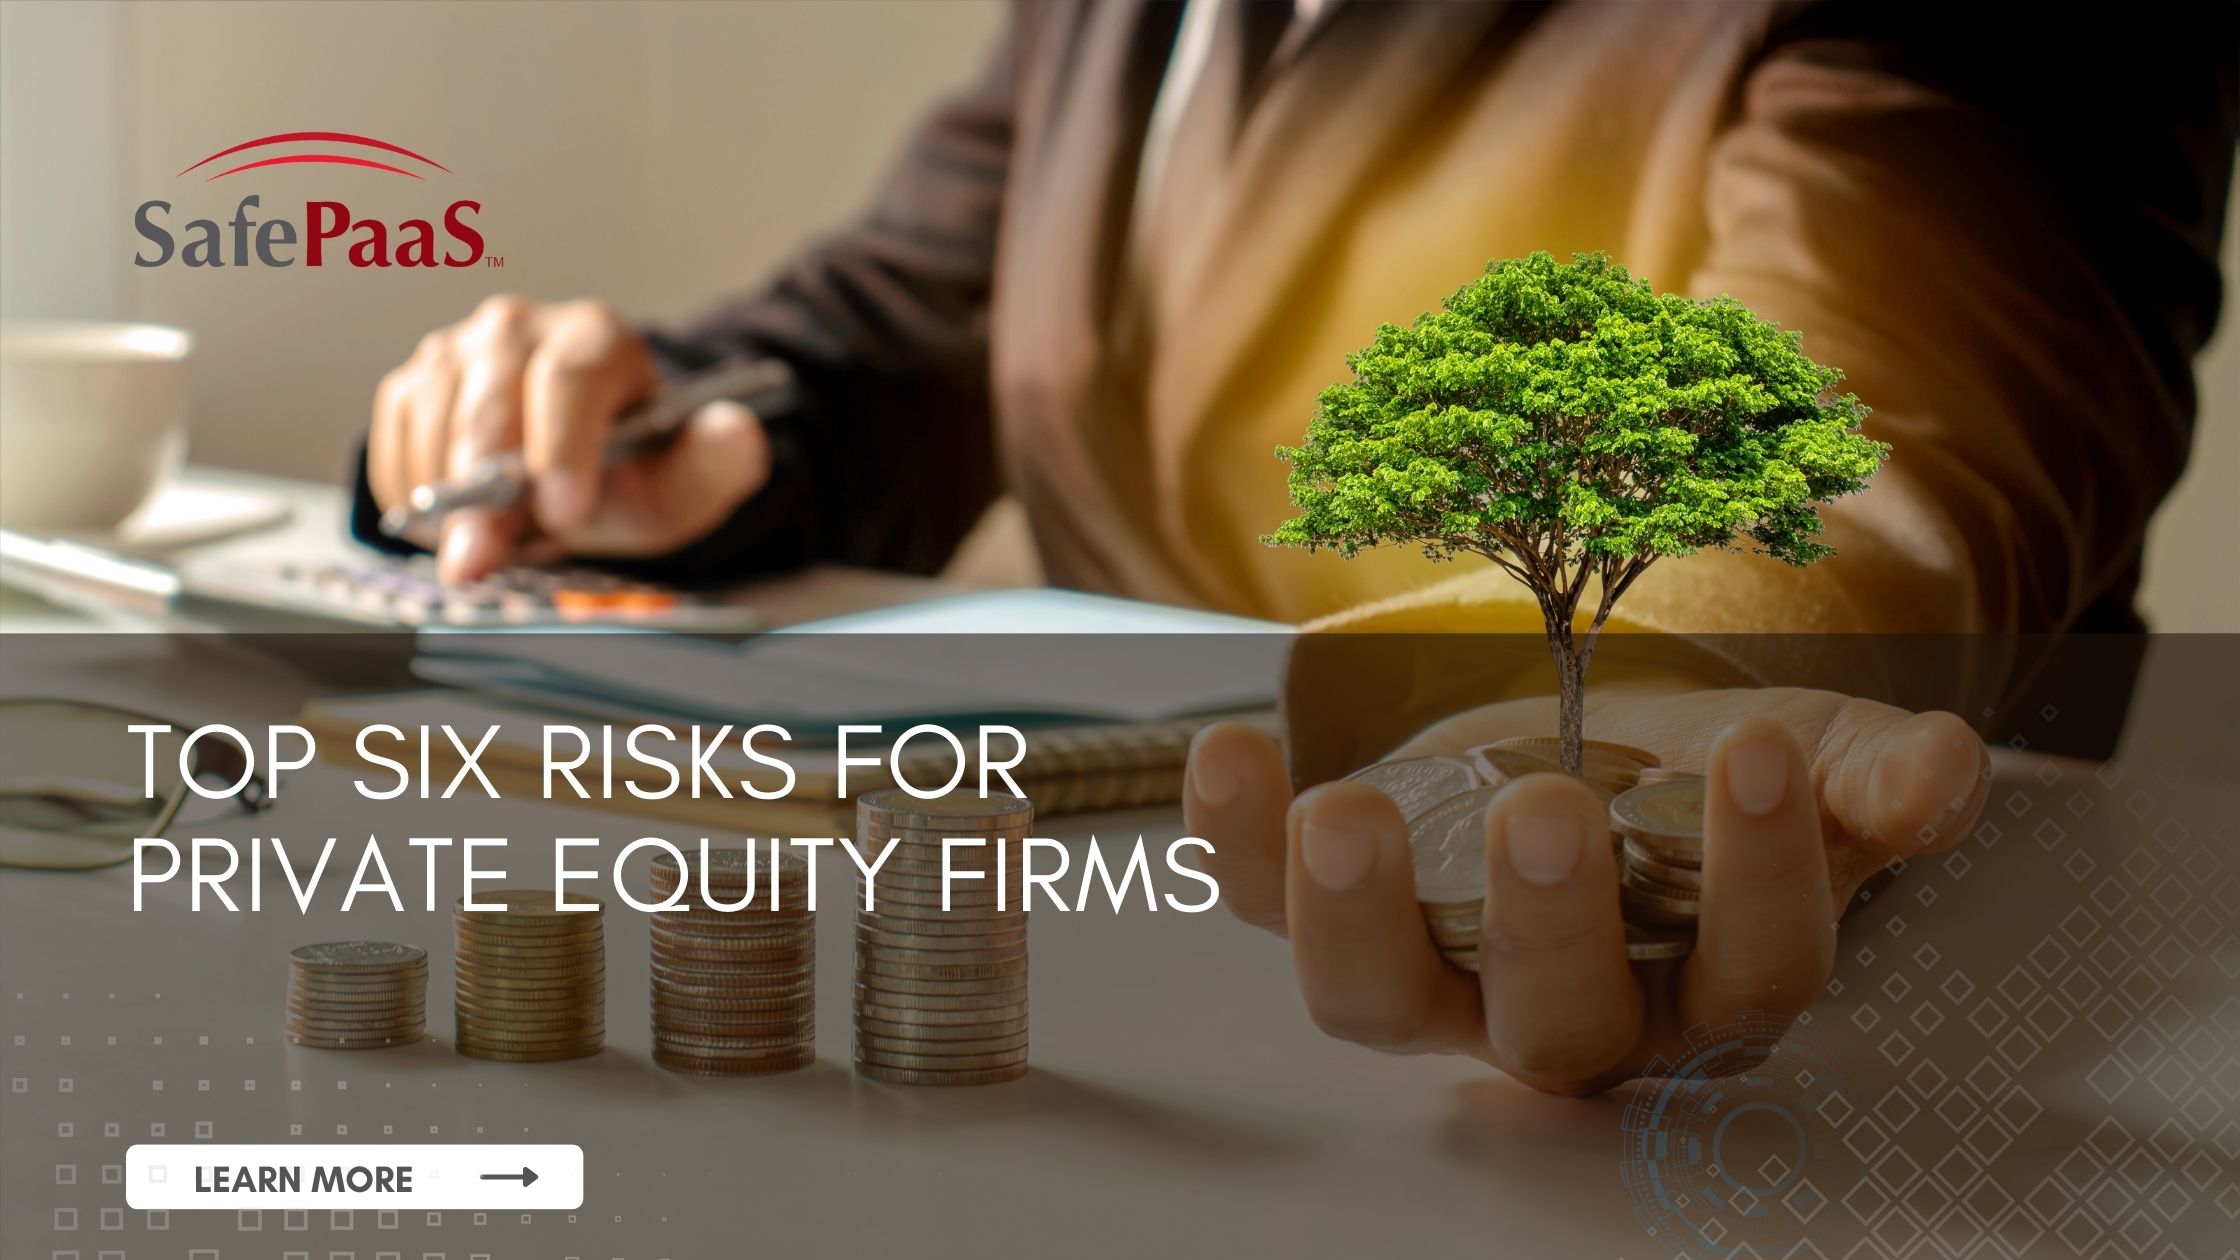 Top five risks for private equity firms - SafePaaS